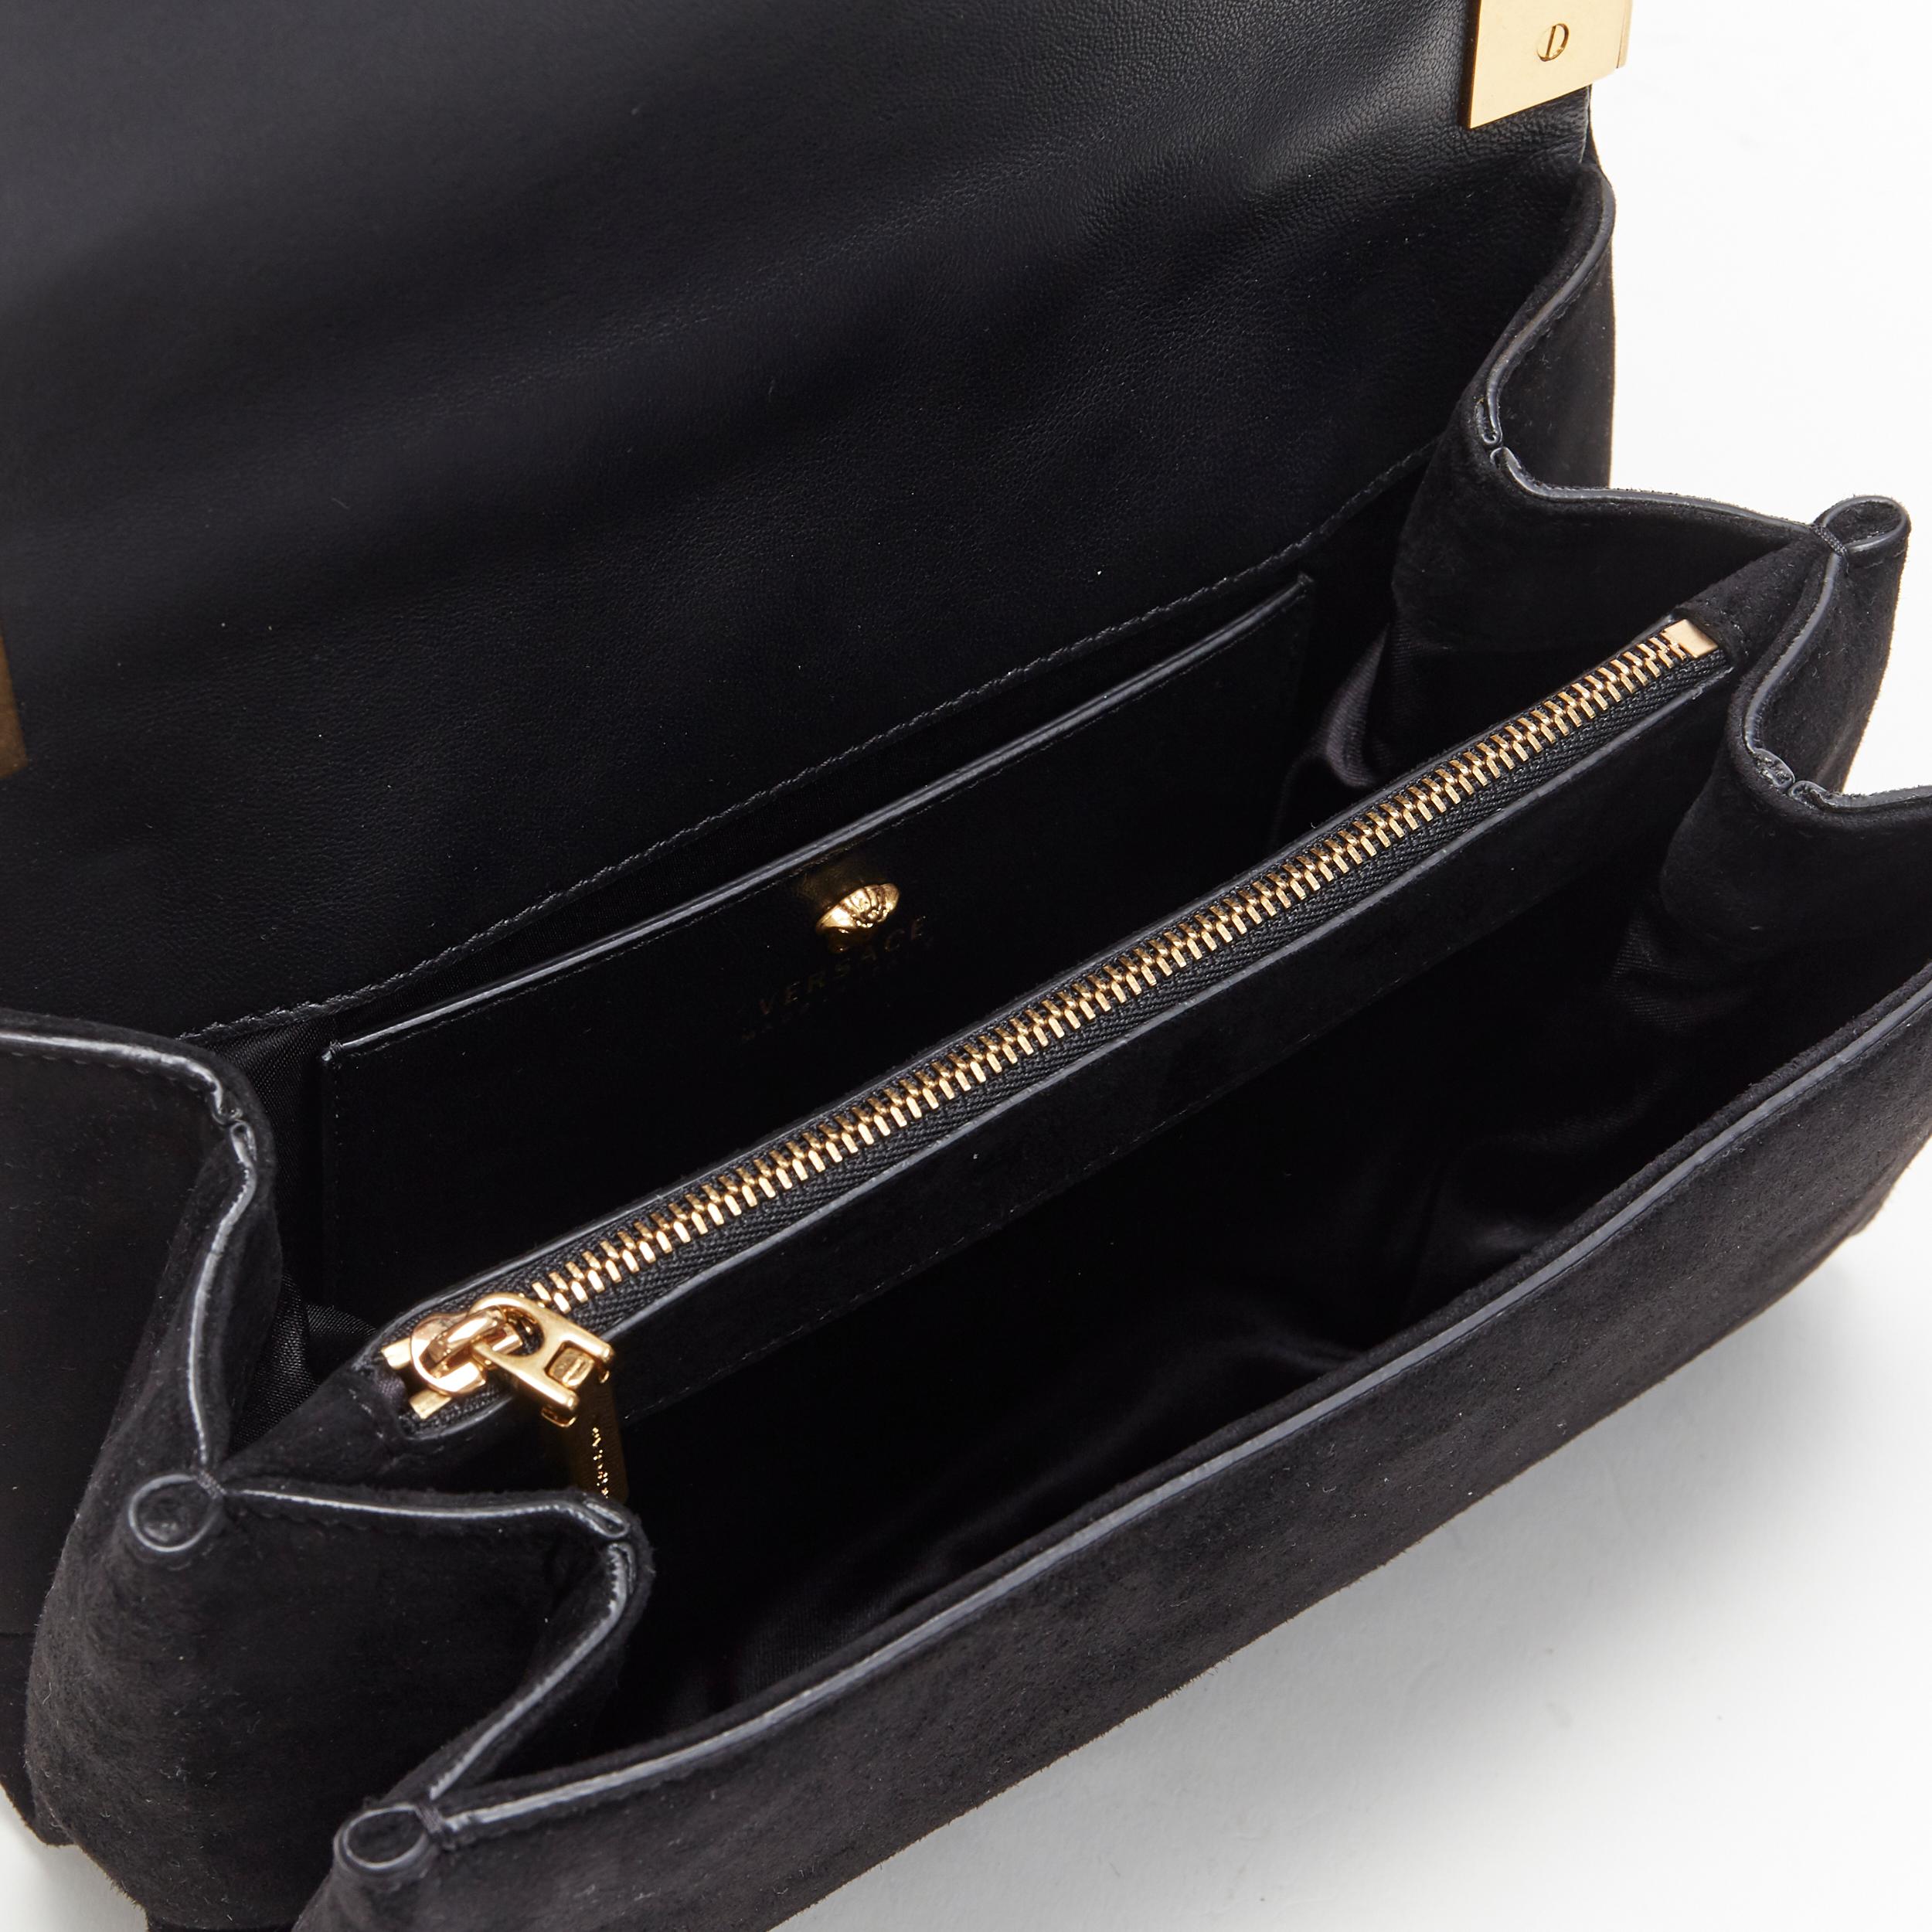 Women's new VERSACE Palazzo Medusa gold strass crystal black suede chain shoulder bag